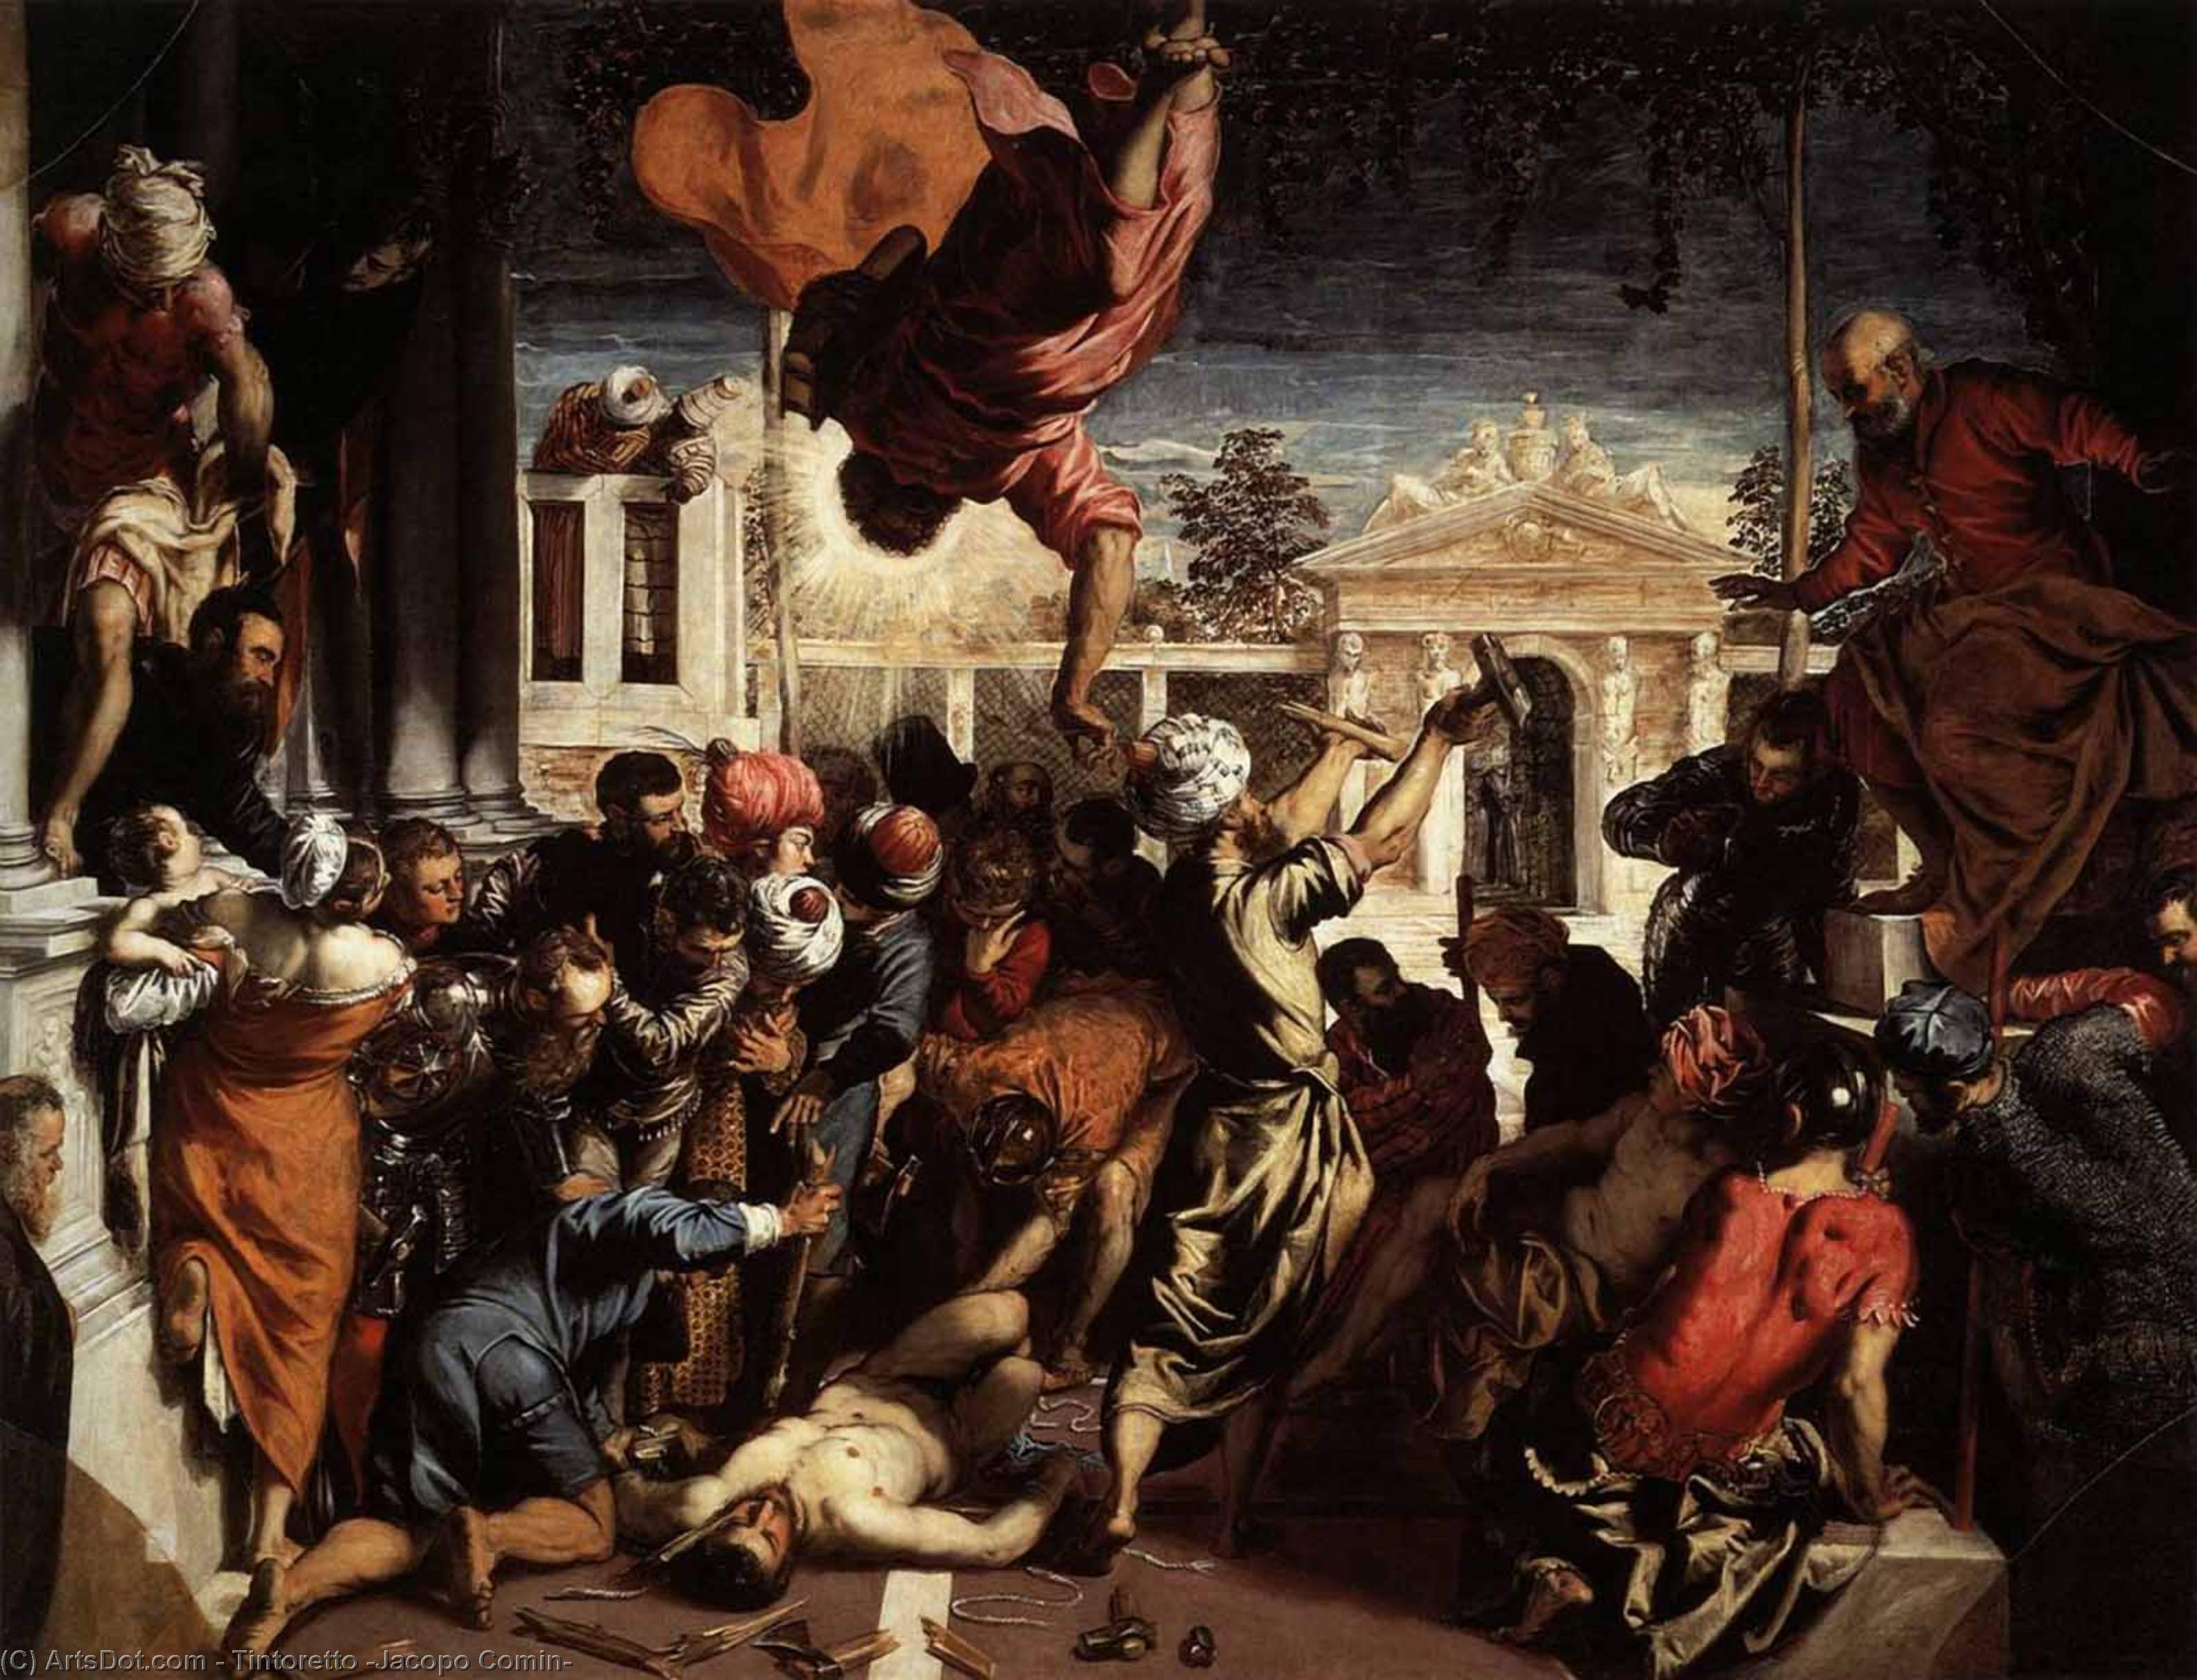 WikiOO.org - Encyclopedia of Fine Arts - Malba, Artwork Tintoretto (Jacopo Comin) - The Miracle of St Mark Freeing the Slave